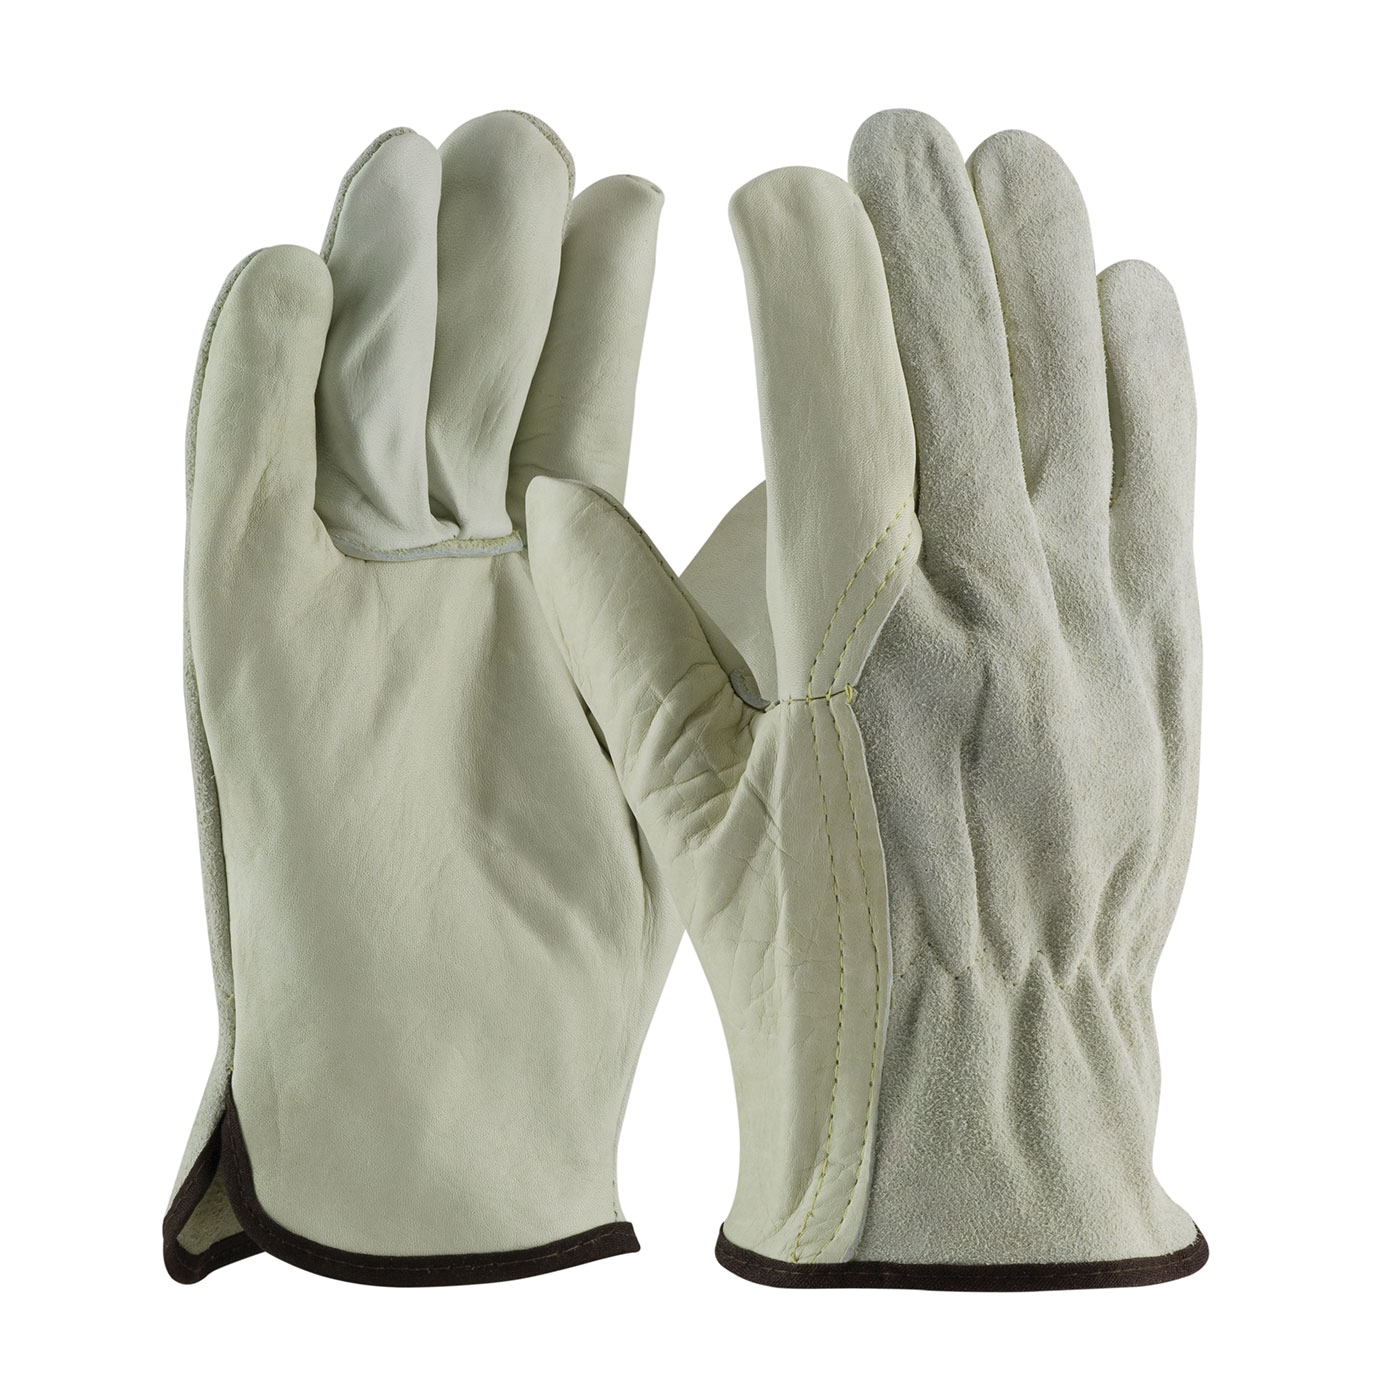 PIP® 68-162SB/S Regular Grade General Purpose Gloves, Drivers, S, Top Grain Cowhide Leather Palm, Top Grain Cowhide Leather, Natural, Slip-On Cuff, Uncoated Coating, Resists: Abrasion, Unlined Lining, Wing Thumb